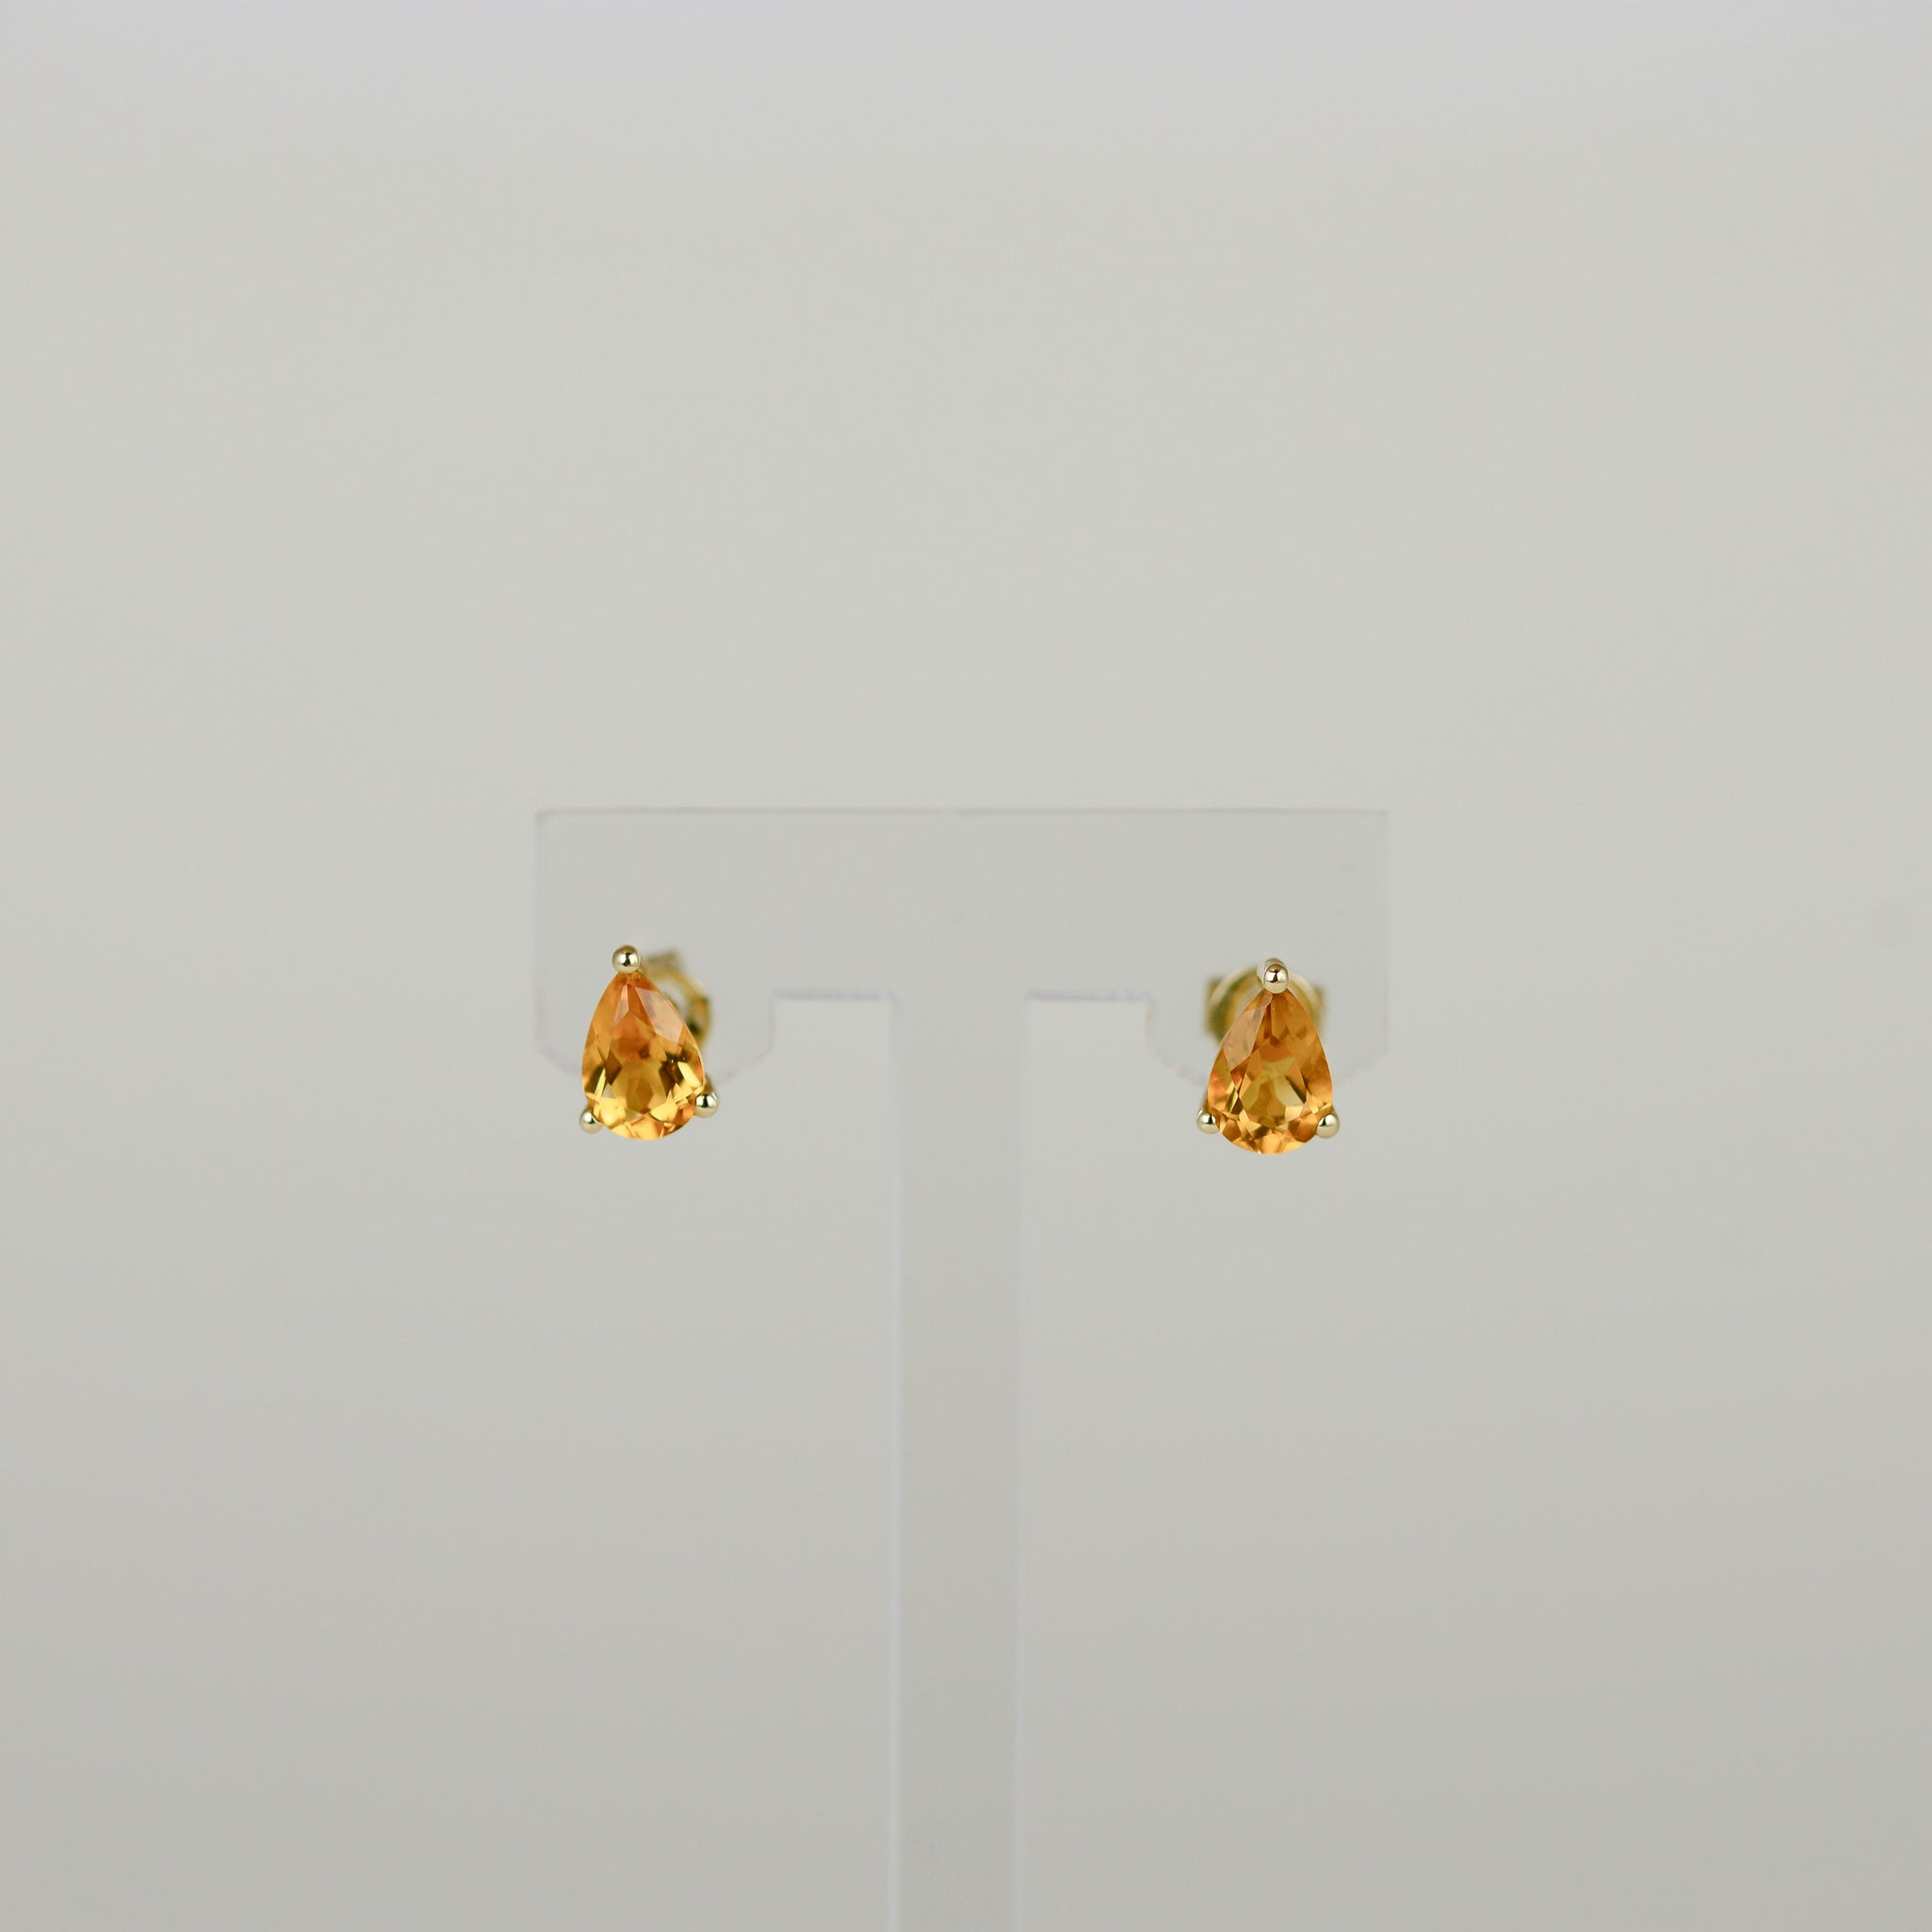 9ct Yellow Gold 1.28ct Pear Cut Citrine Stud Earrings